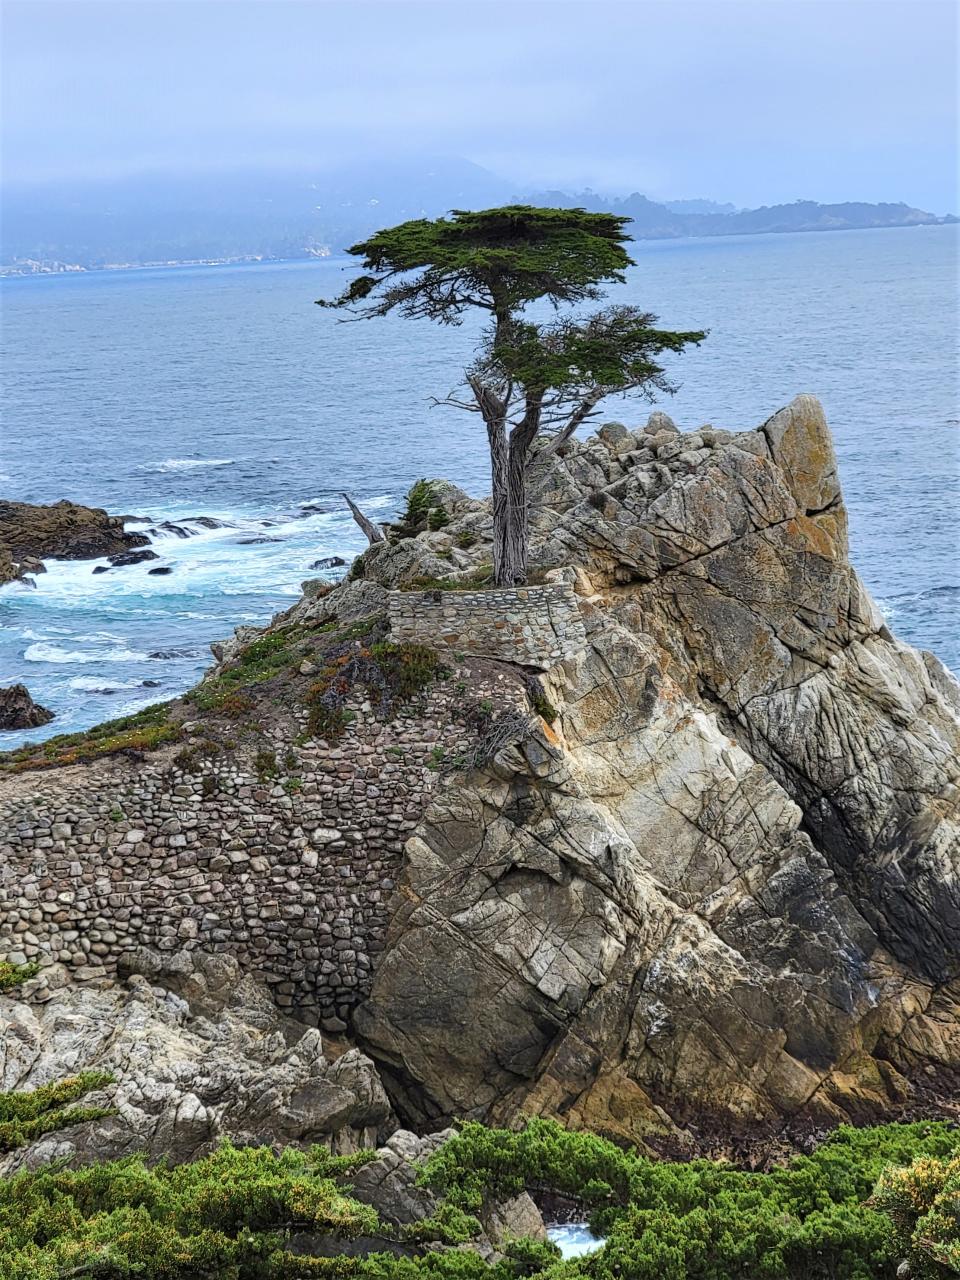 The Lone Cypress at Pebble Beach has stood guard overlooking the Pacific Ocean for an estimated 250 years.